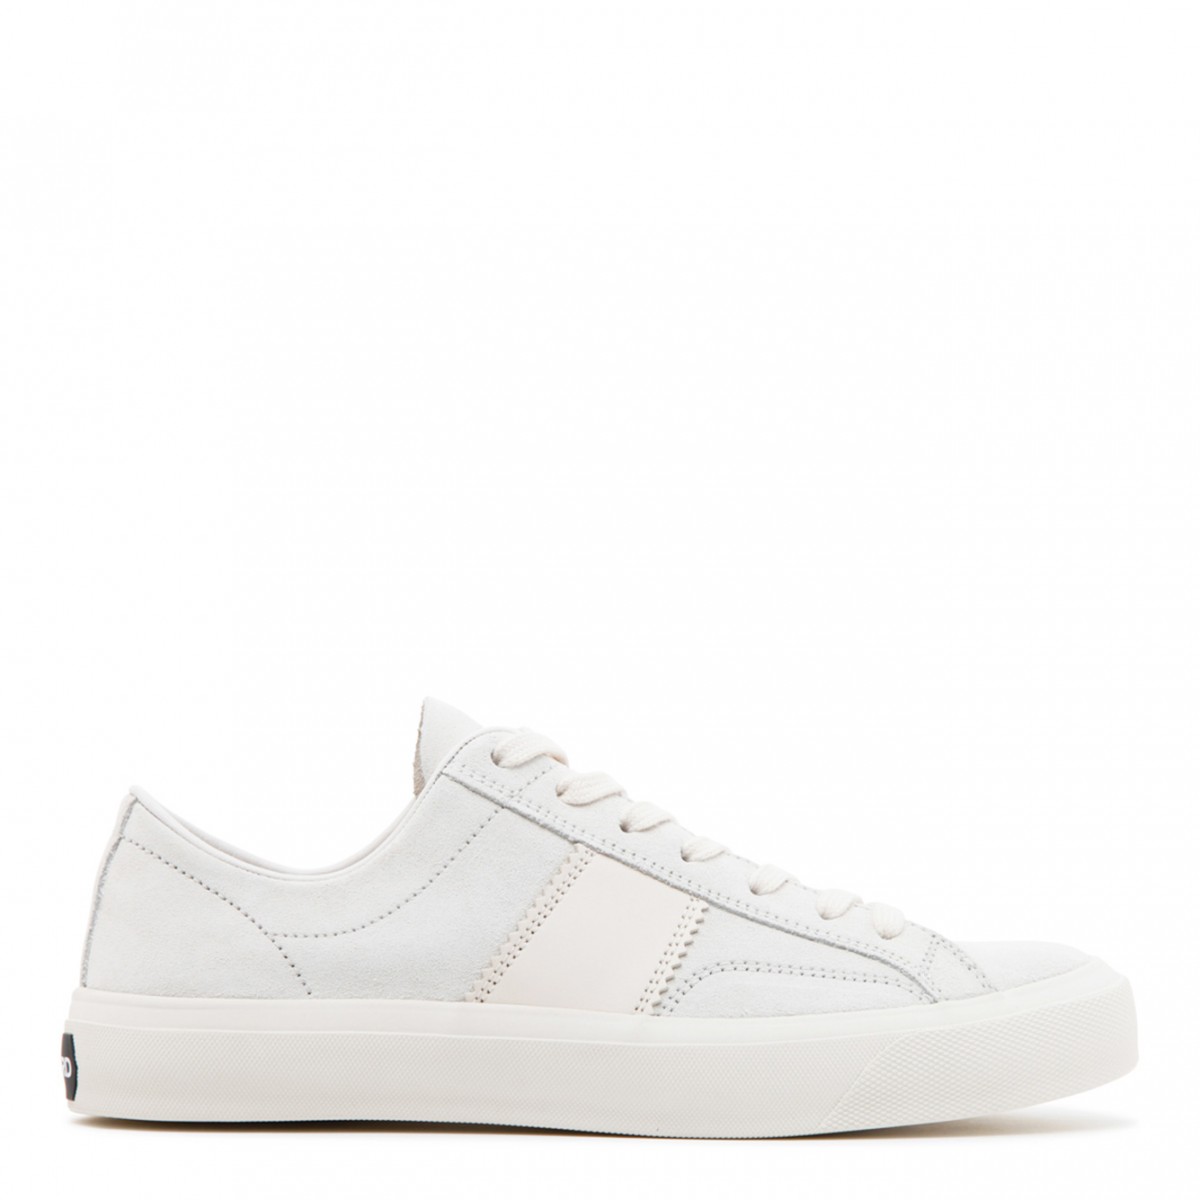 White and Beige Calf Leather Low Top Sneakers